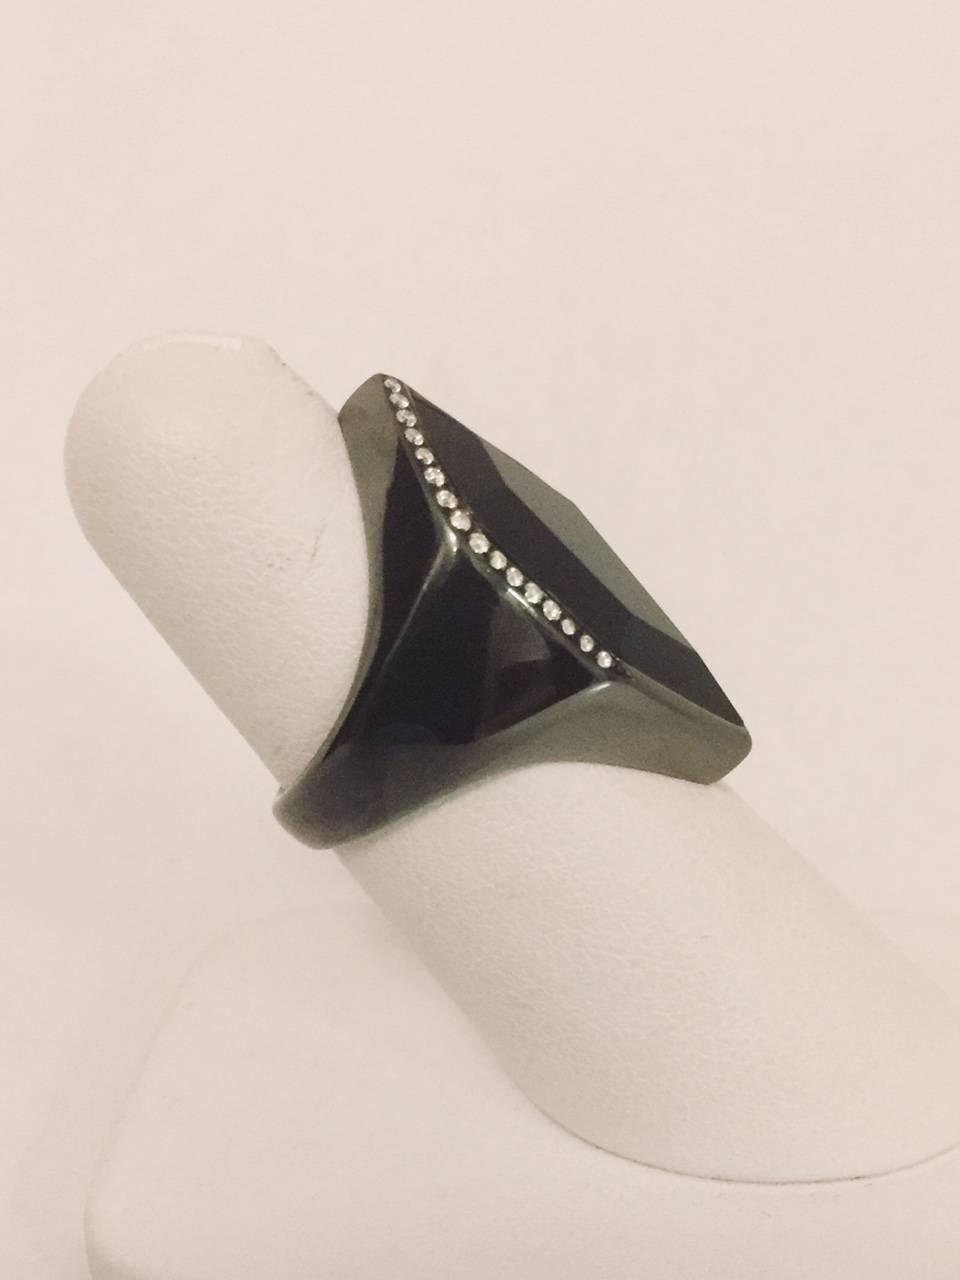 Ippolita Fine Jewelry, made in Italy, has become a fine jewelry favorite!  Outstanding designs both fresh and contemporary are hard to keep in stock!  This fantastic ring fabricated in sterling silver has been black rhodium finished.  An impressive,